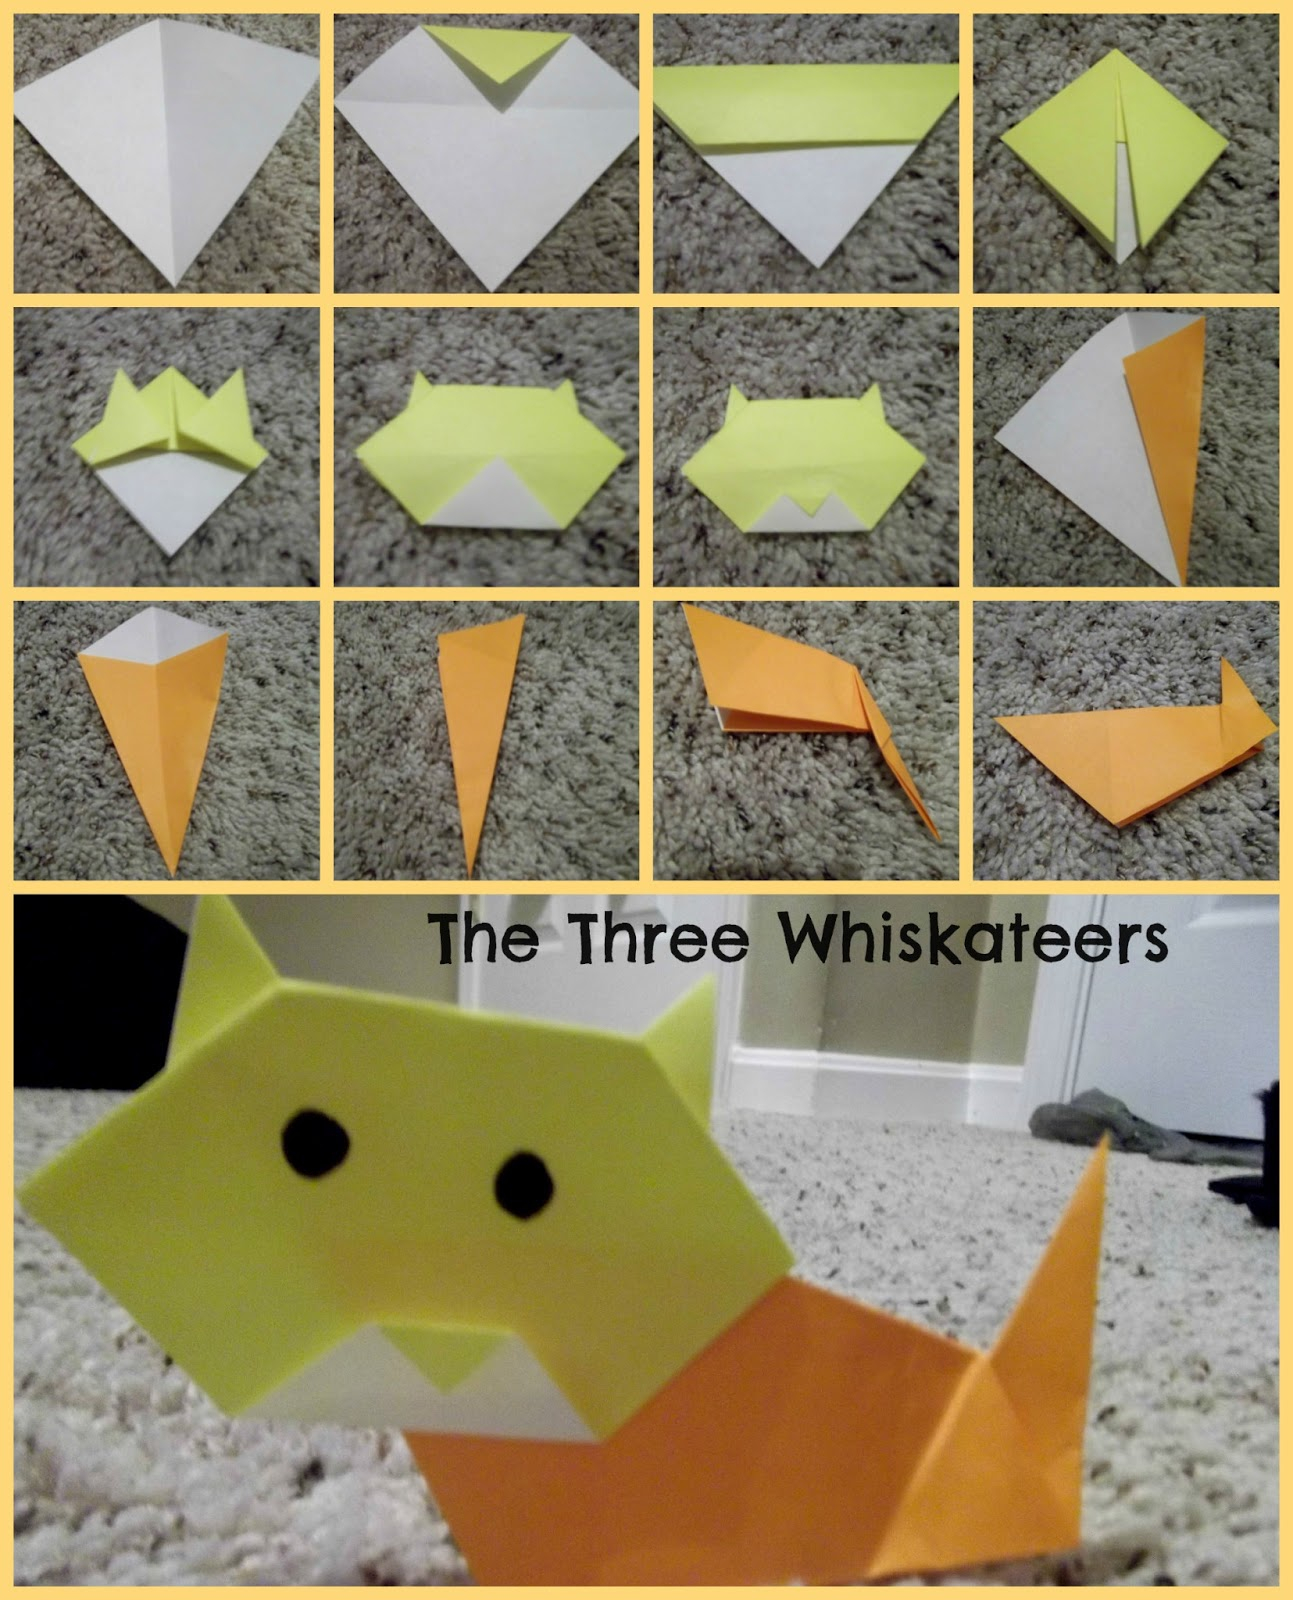 How To Make Origami Cat The Three Whiskateers Thursday 13 And How To Make An Origami Cat